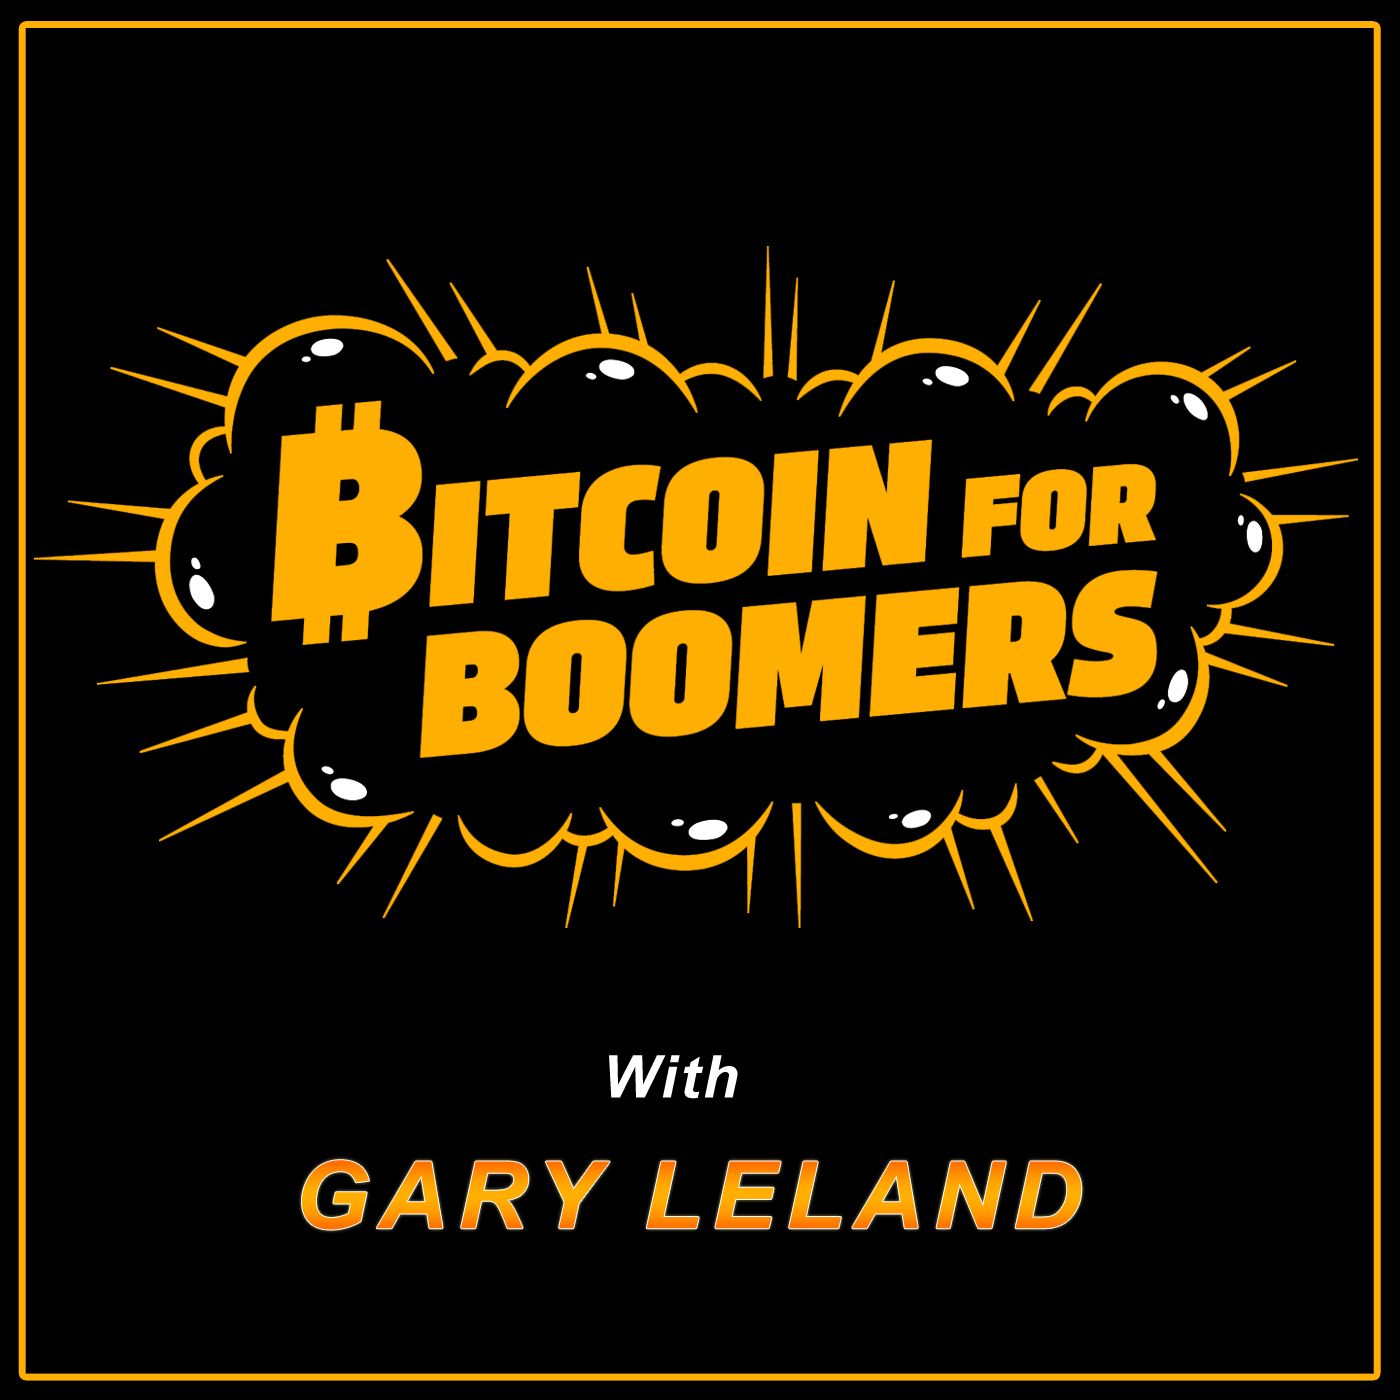 Bitcoin for Boomers with Gary Leland